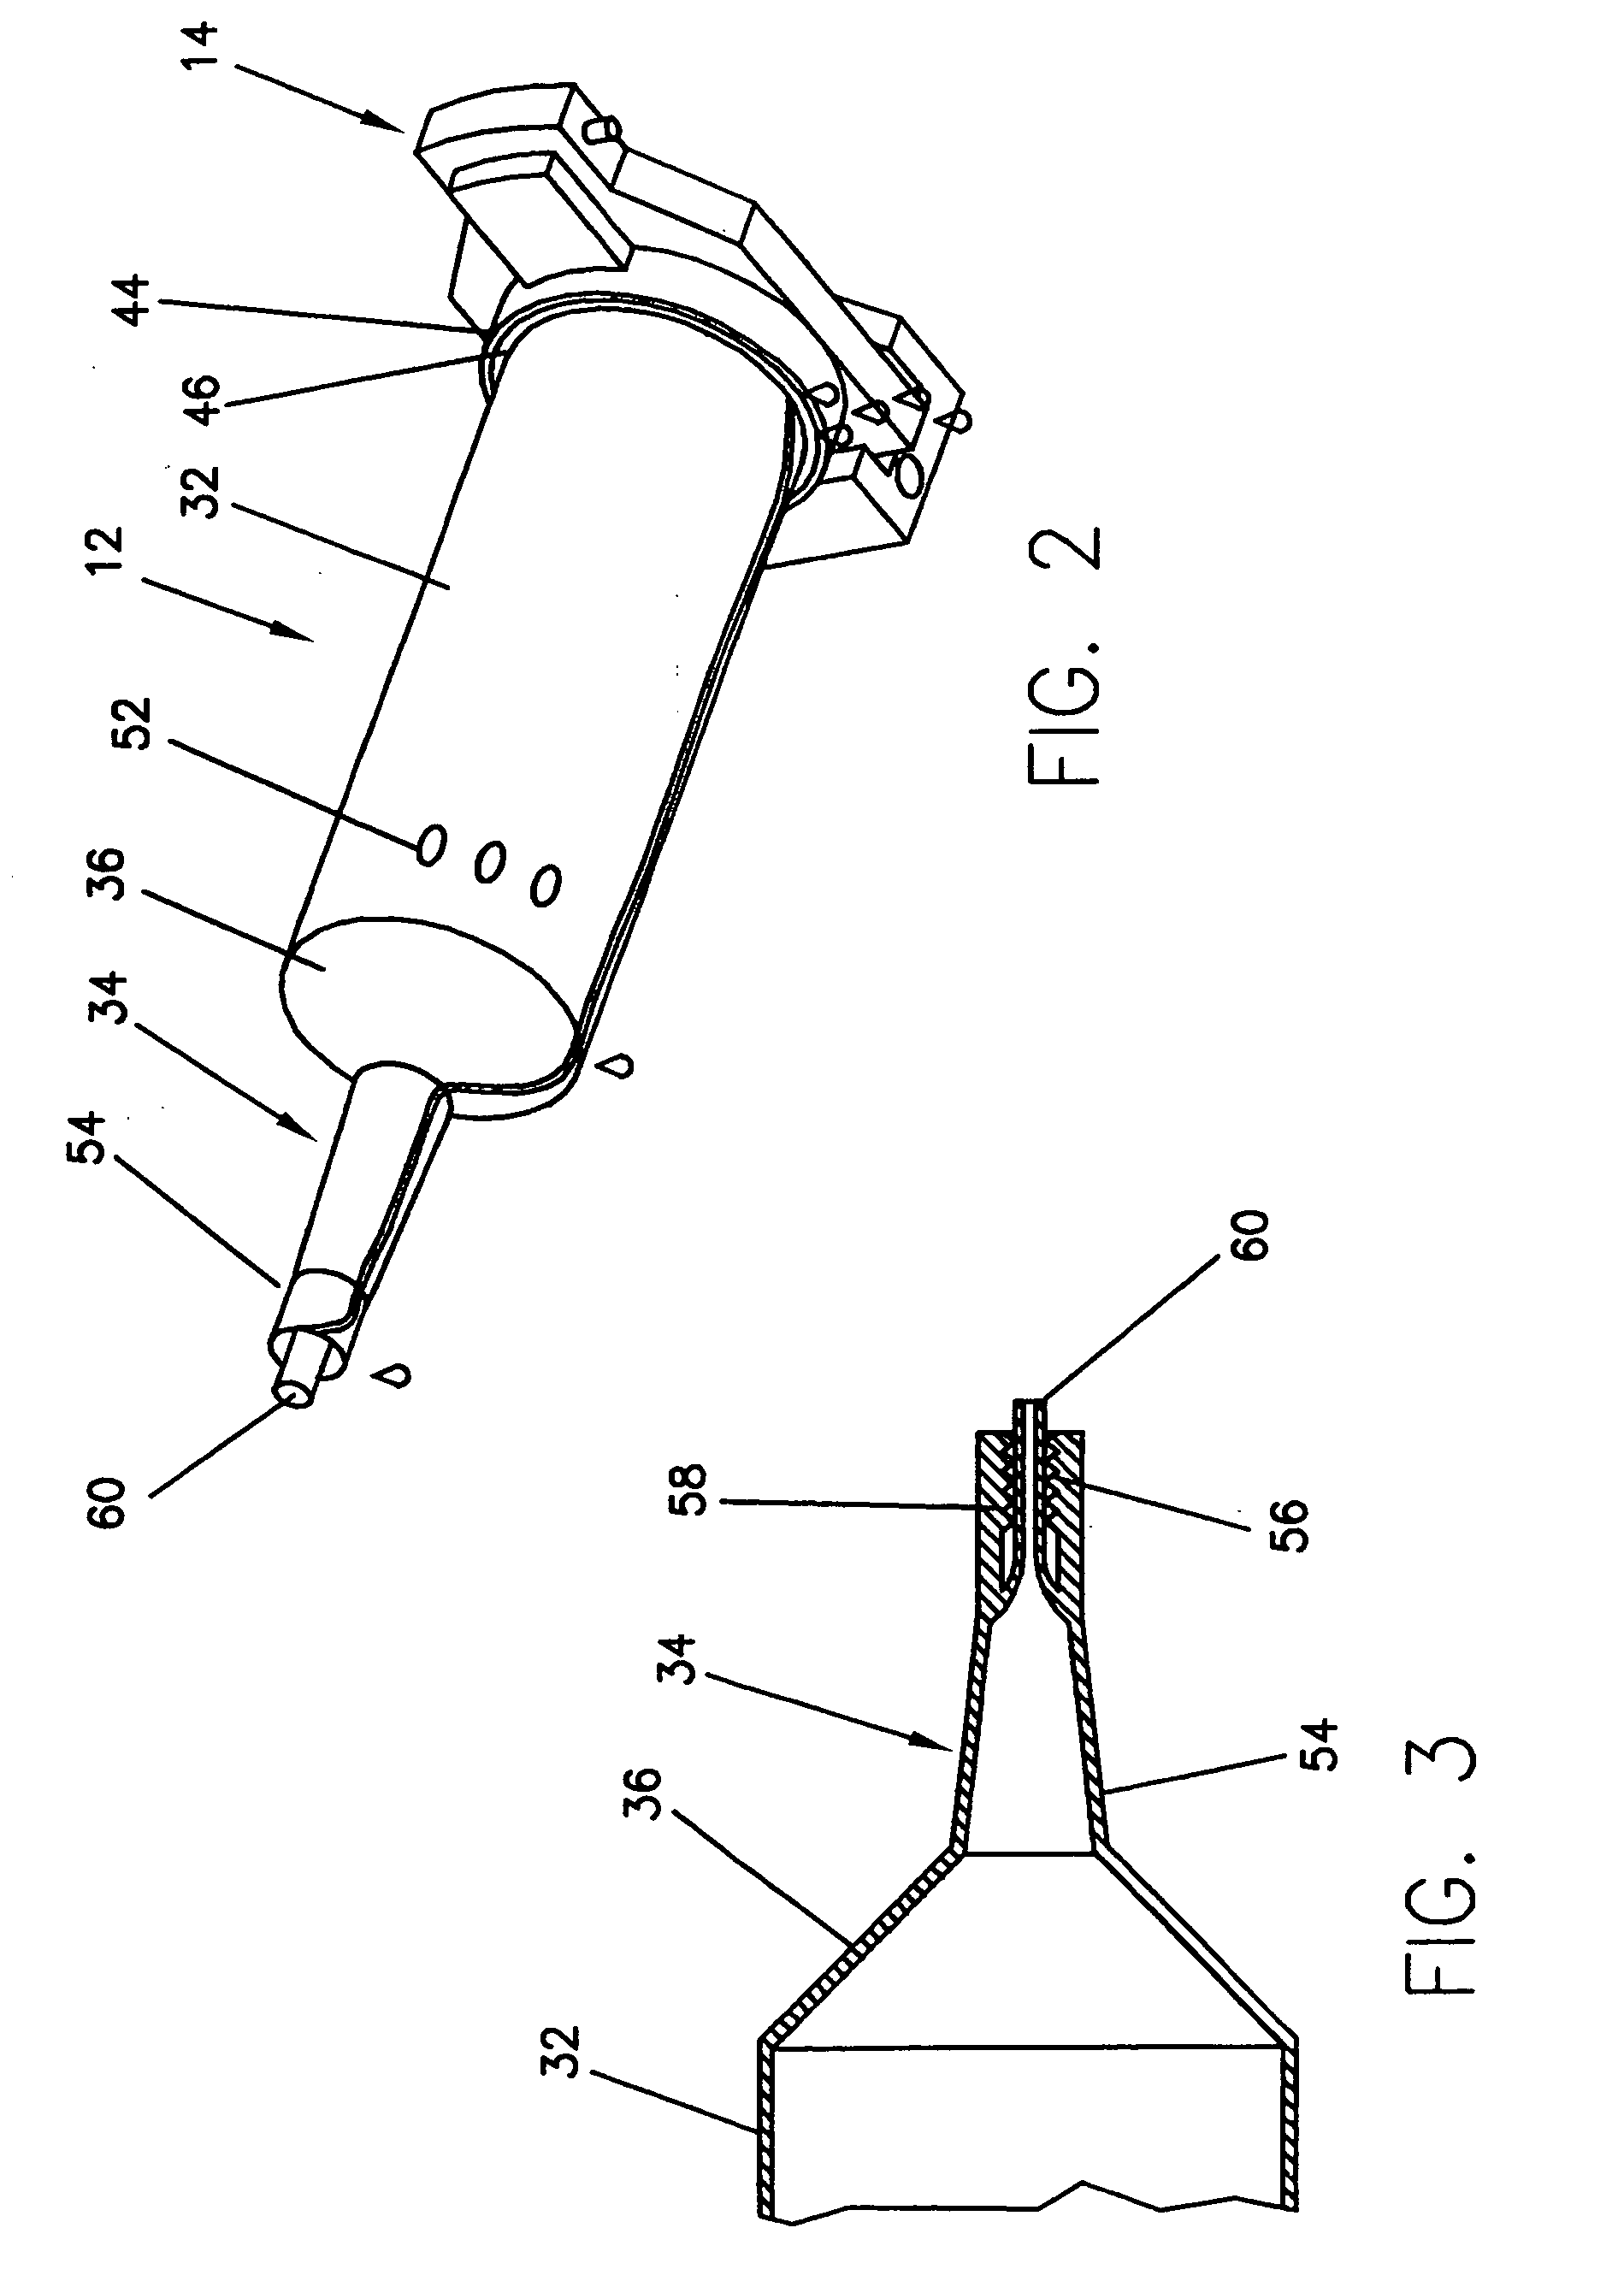 Syringes, syringe interfaces and syringe plungers for use with medical injectors